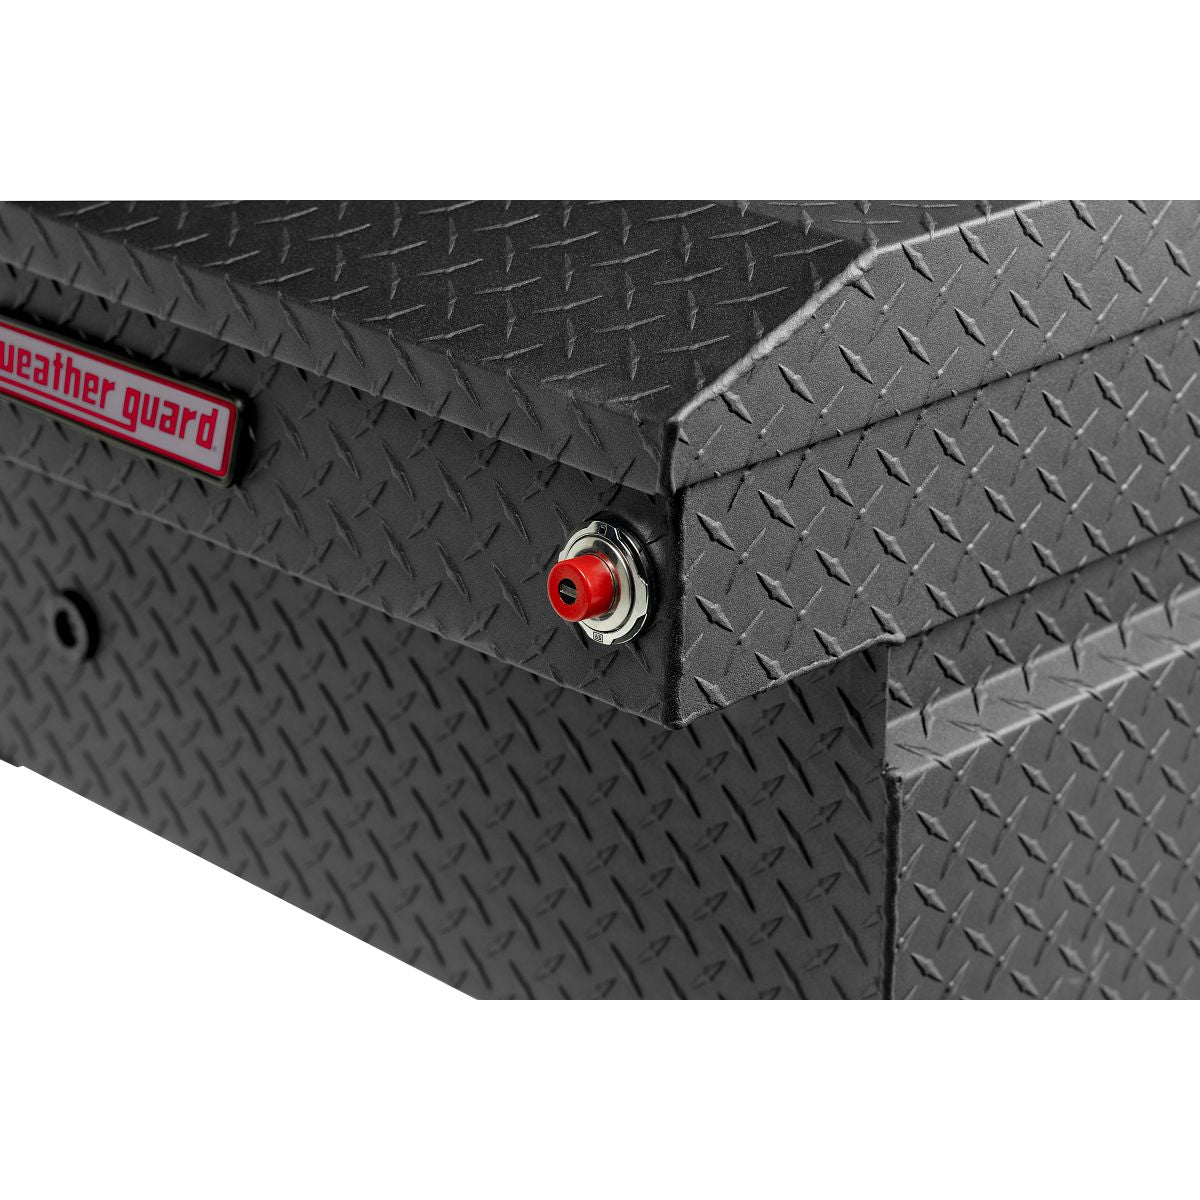 Weather Guard Crossover Toolbox Textured Matte Black Aluminum Extra Wi ...